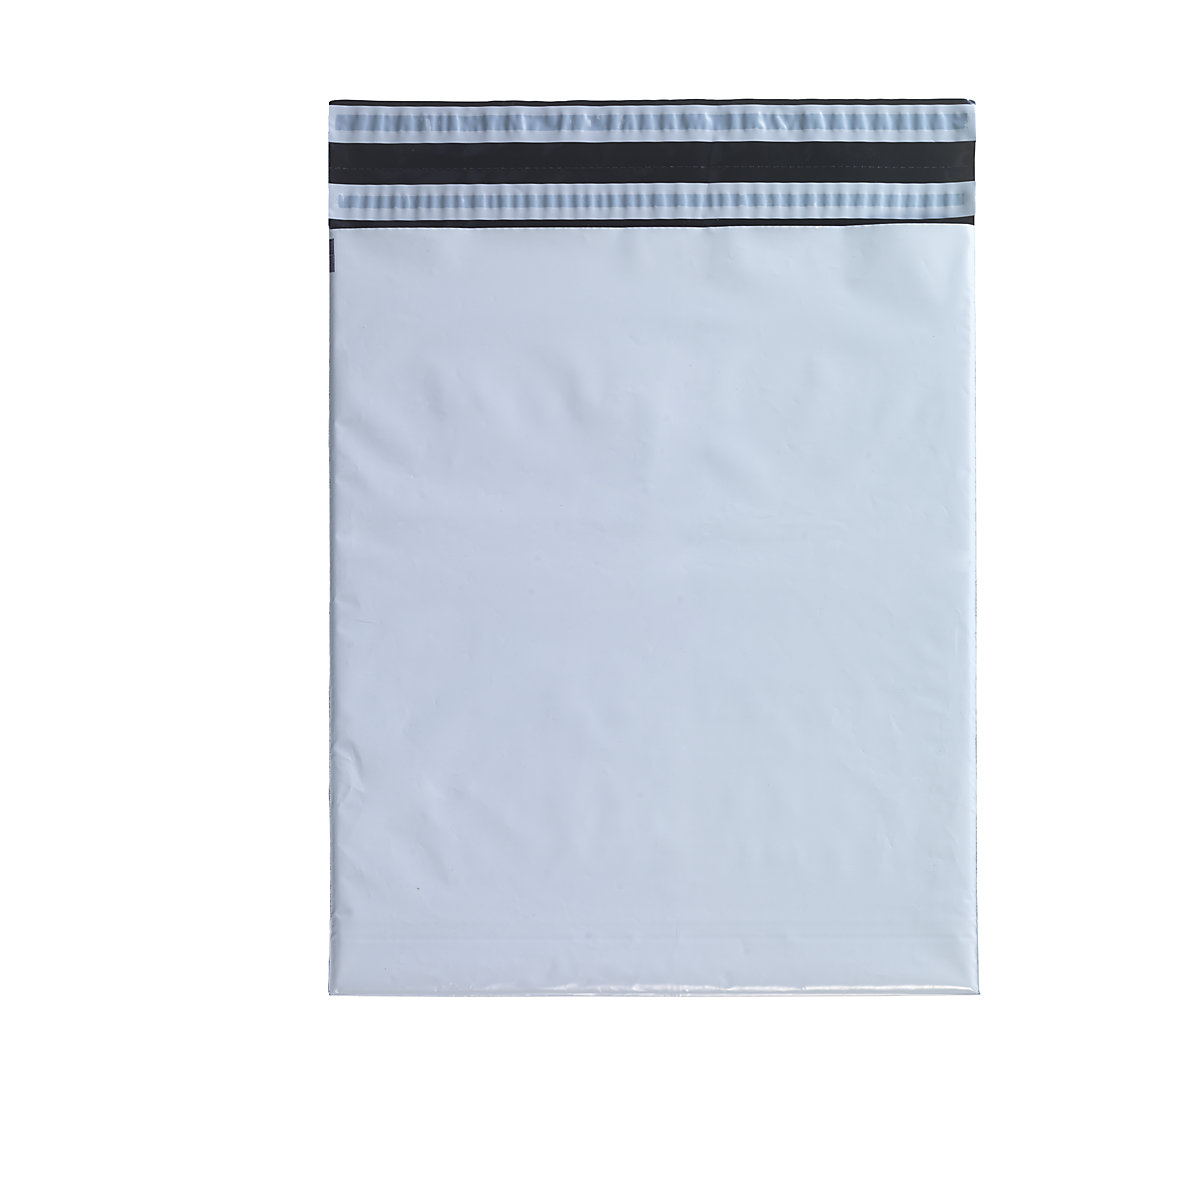 Dispatch bag, non-transparent, double adhesive seal, LxW 420 x 340 mm, pack of 500-2